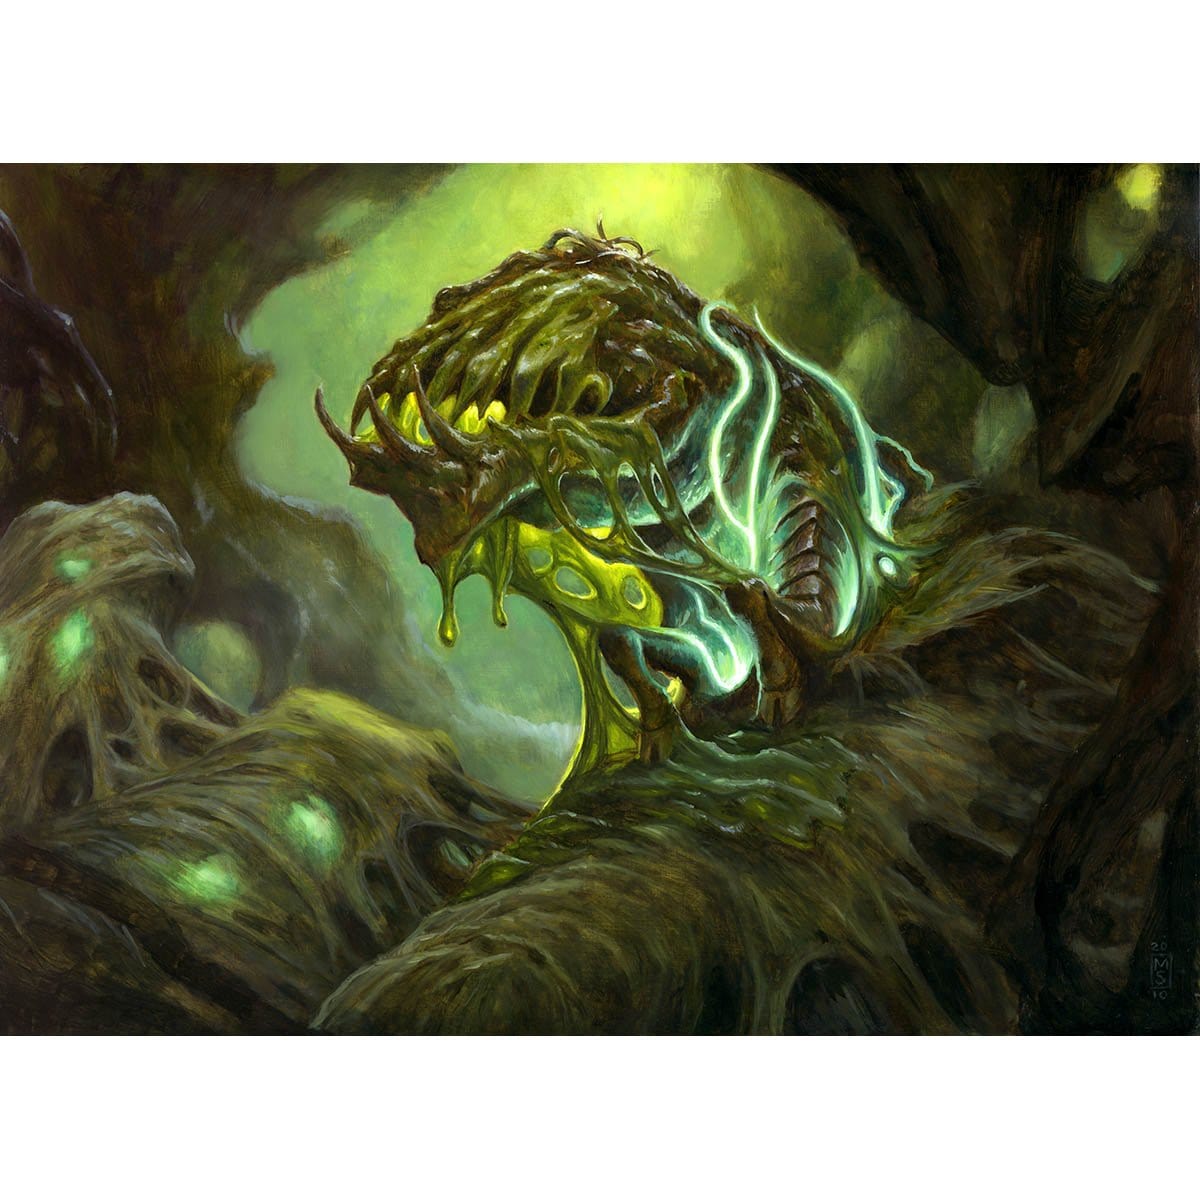 Noxious Revival Print - Print - Original Magic Art - Accessories for Magic the Gathering and other card games